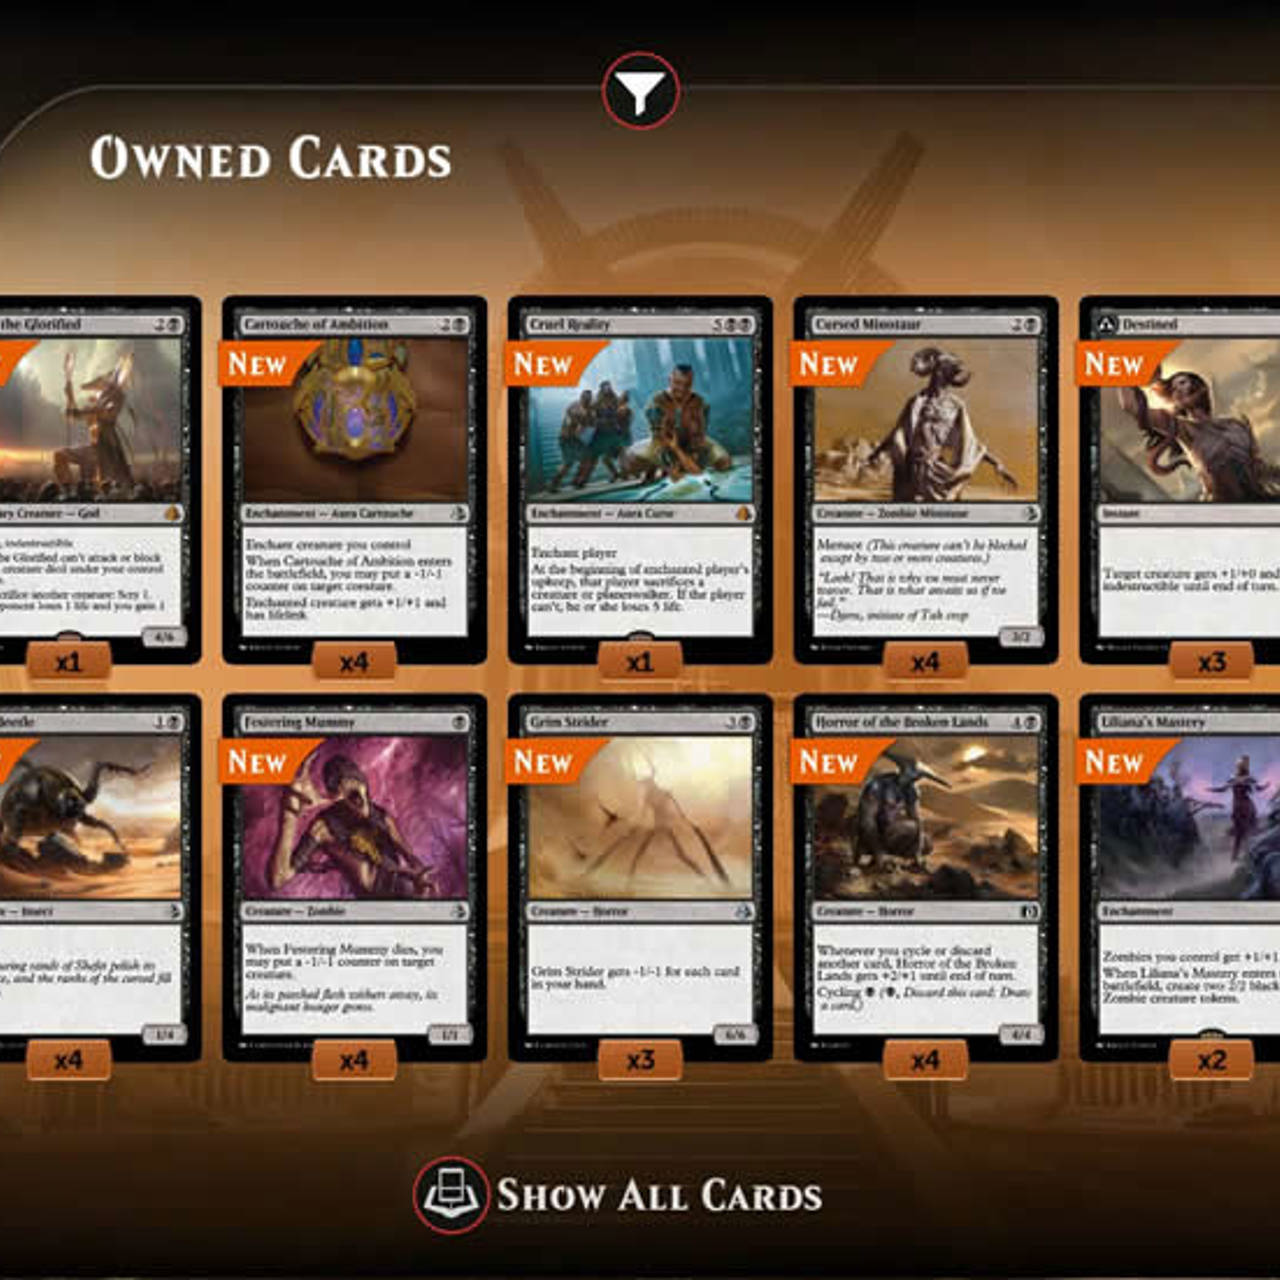 Screenshot Image of 14 cards laid out, all labelled as New